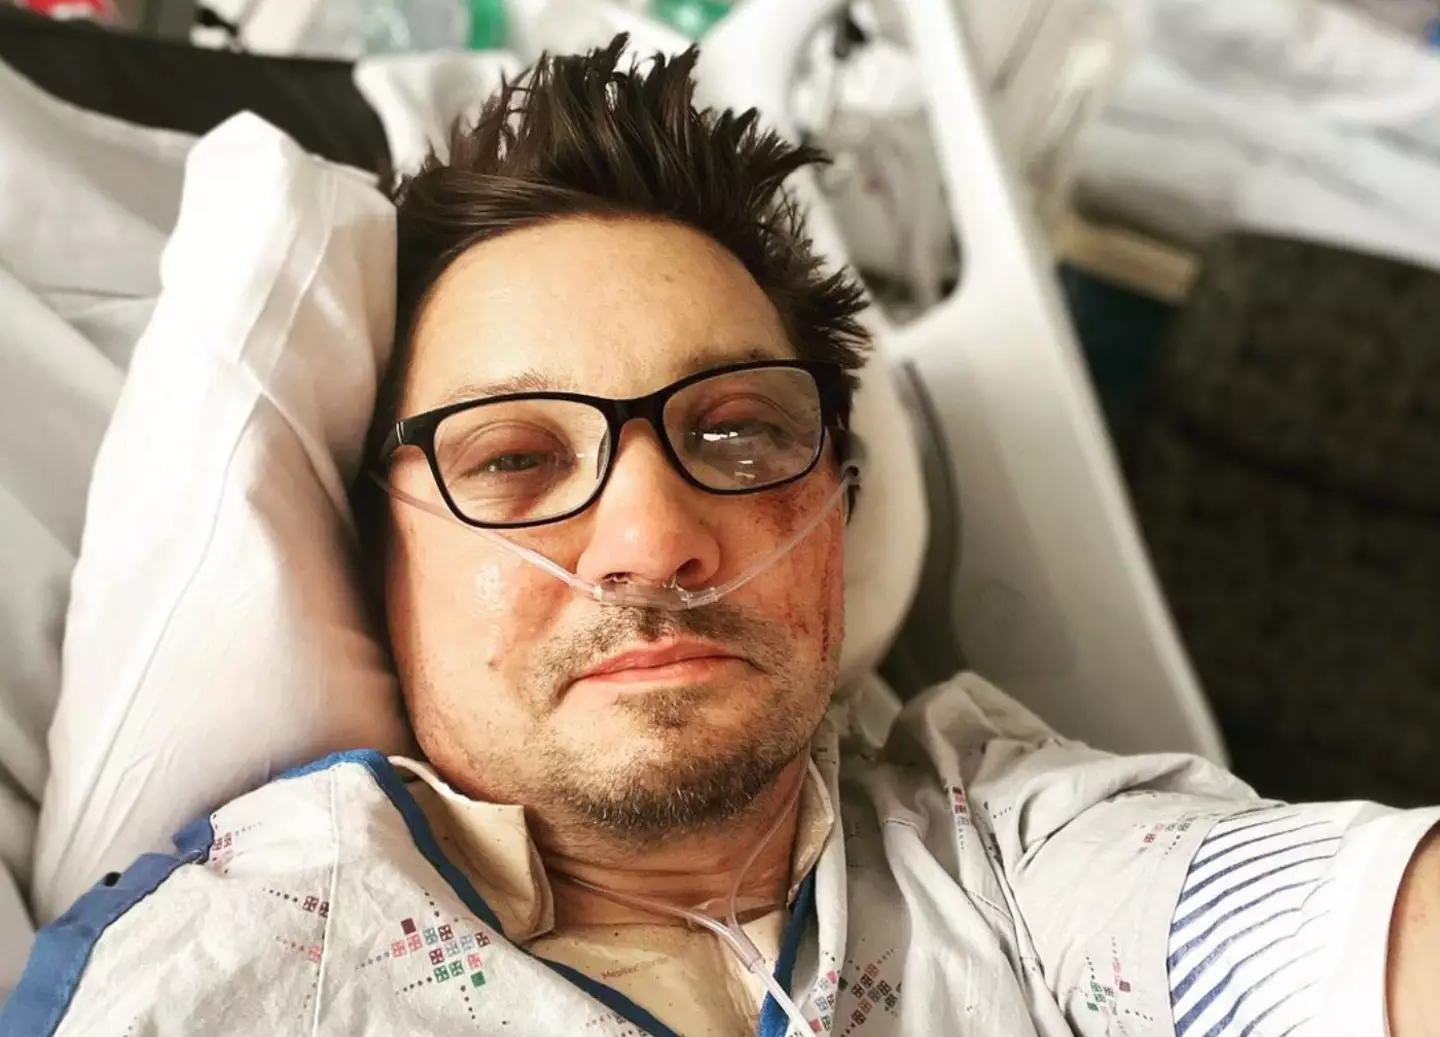 The actor suffered a horrific injuries from the accident (Instagram/@jeremyrenner)